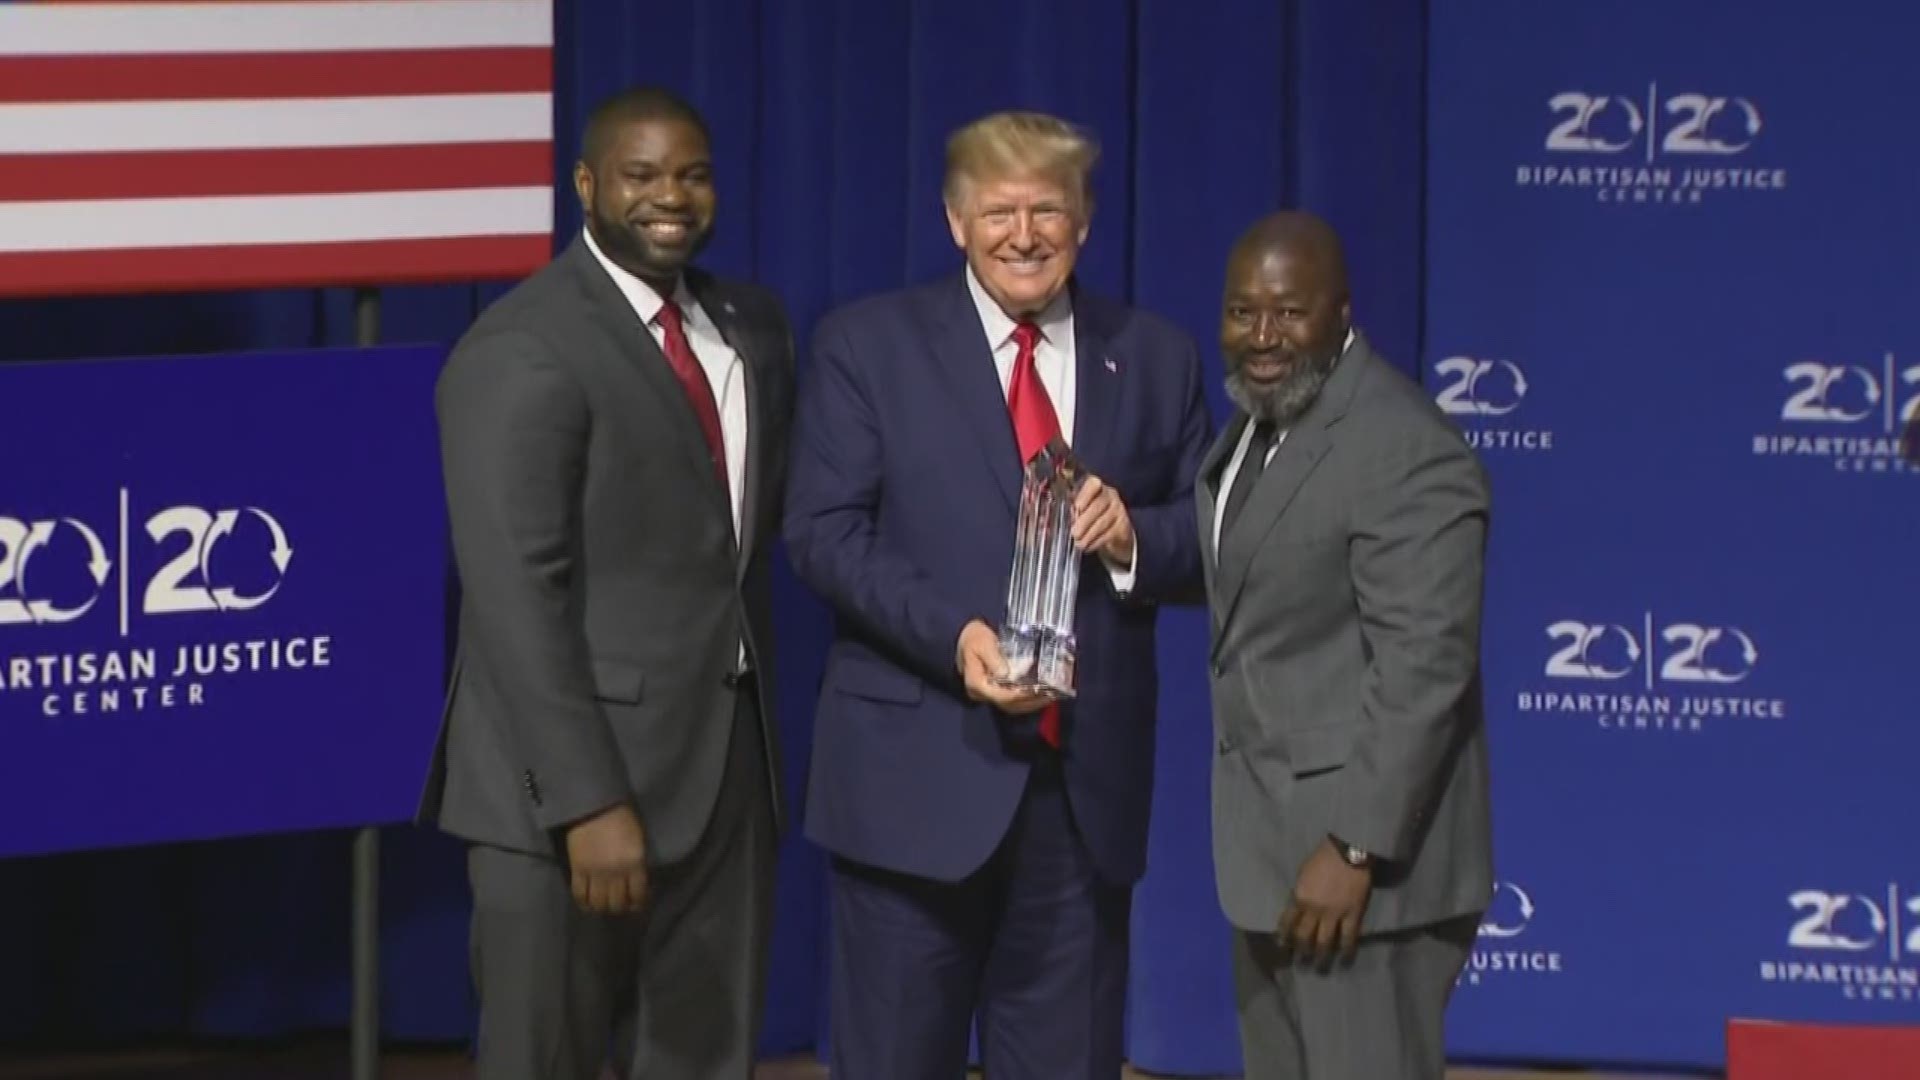 The President received the Bipartisan Justice Award for his work on the issue of criminal justice reform.